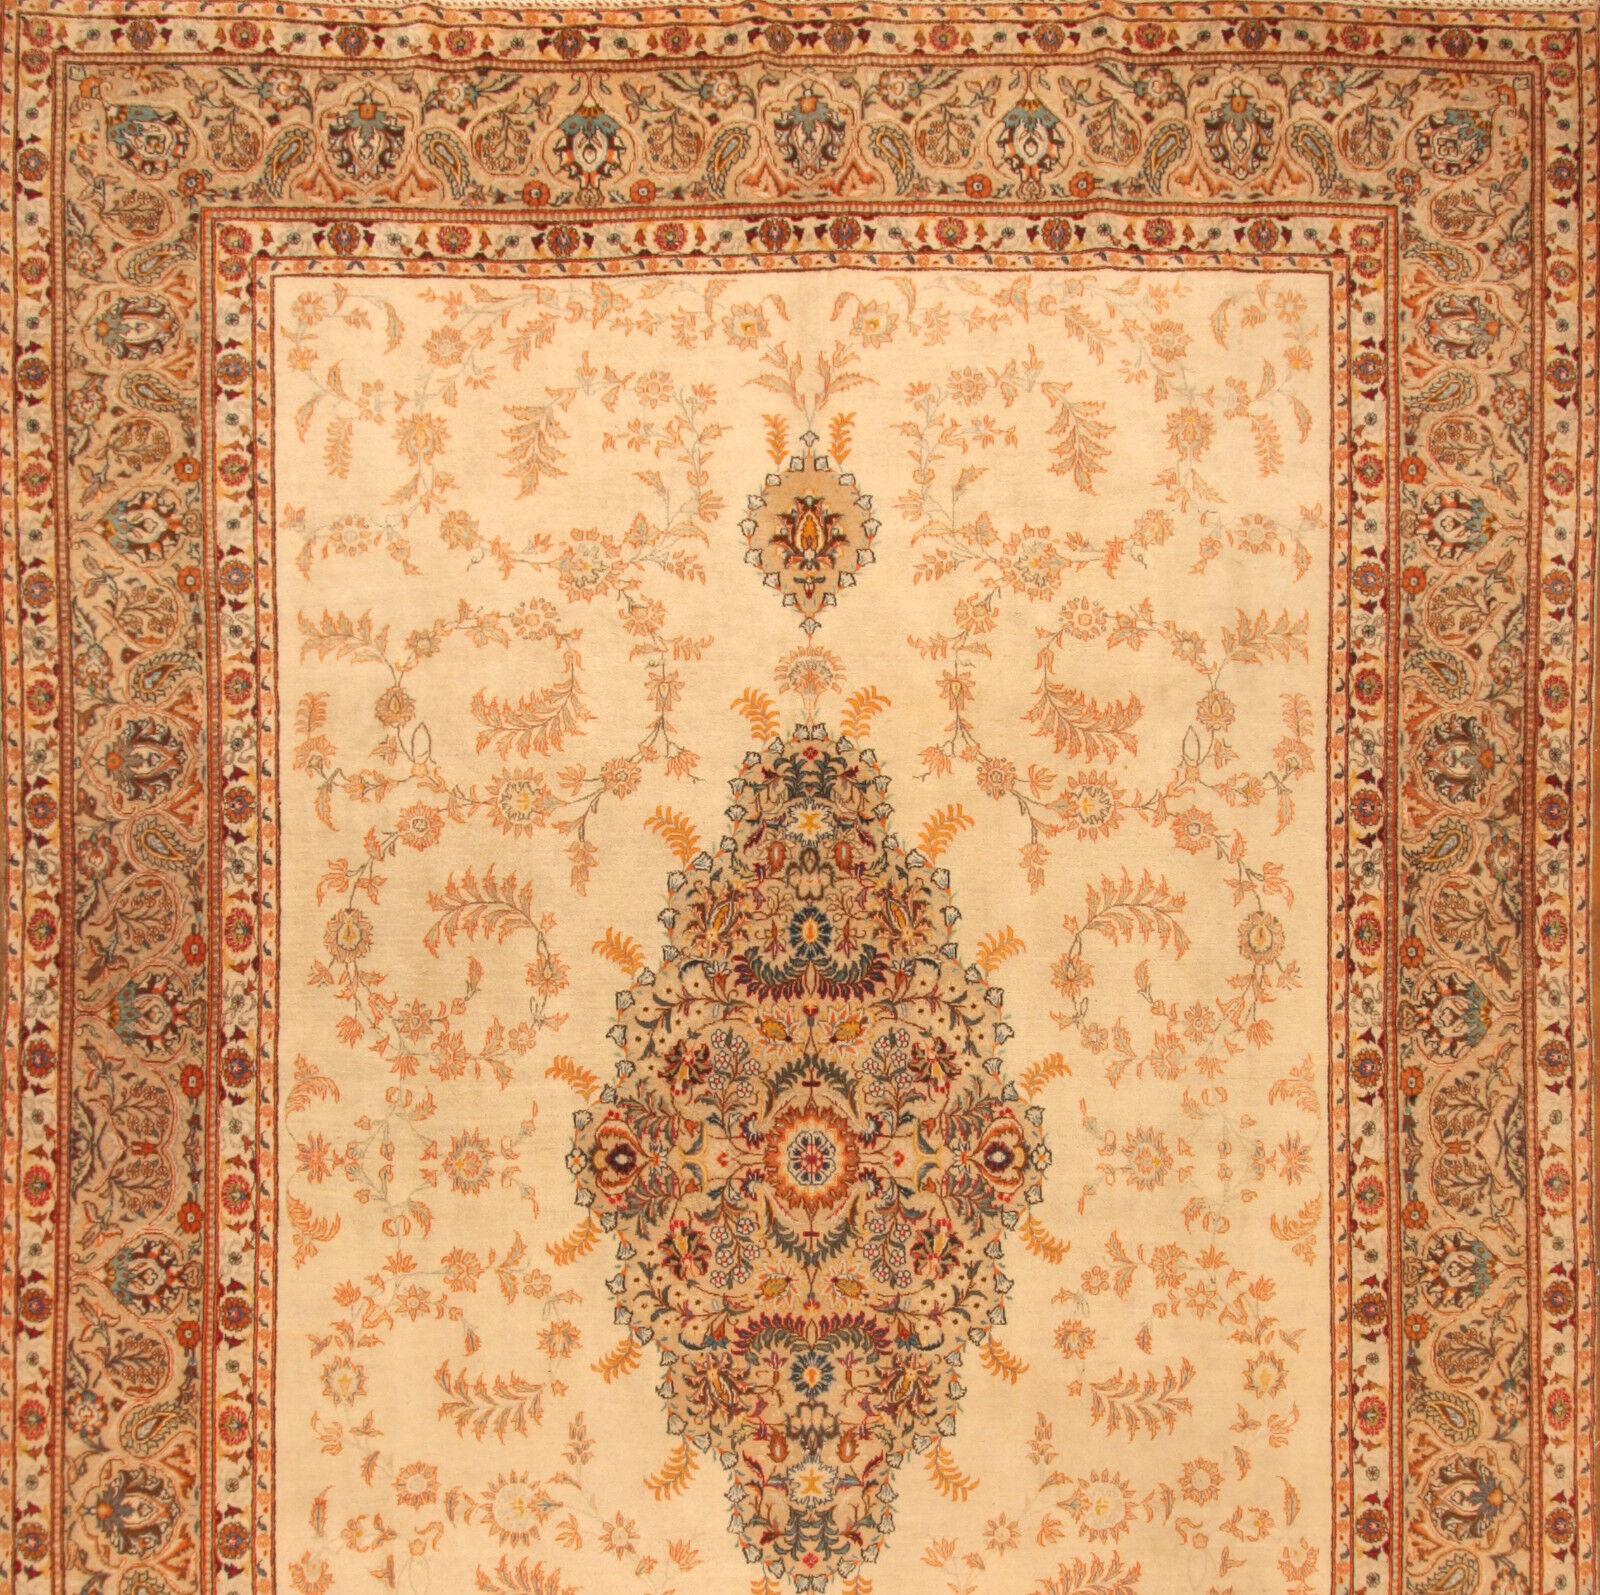 Handmade Contemporary Persian Style Tabriz Rug 8.9' x 12.8', 2000s - 1T05 For Sale 5